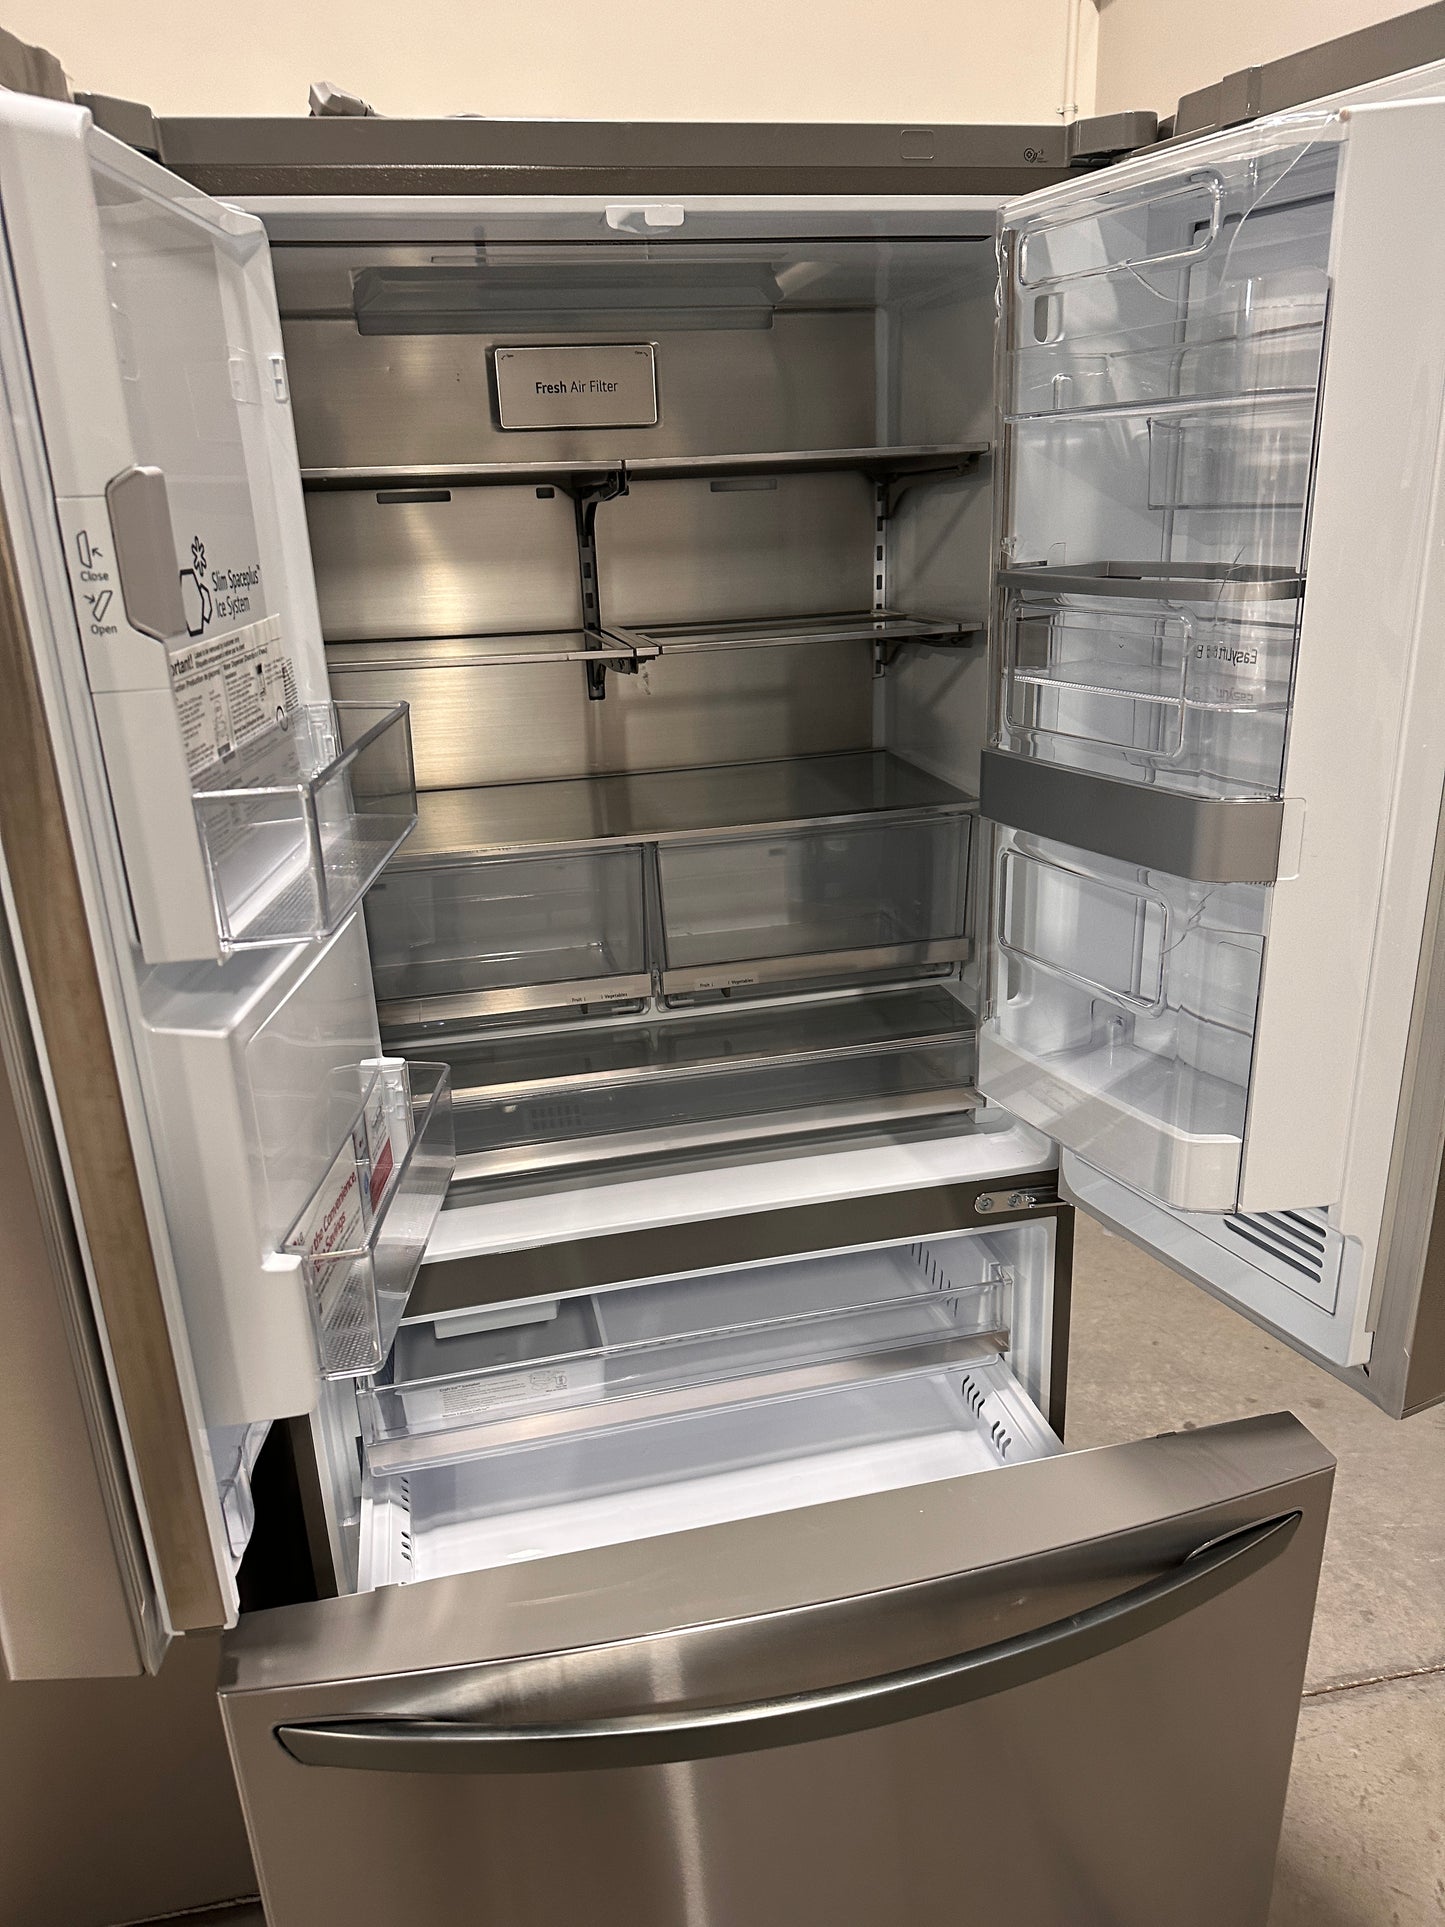 Counter-Depth Refrigerator with Craft Ice - Stainless steel  Model: LRFDC2406S  REF12149